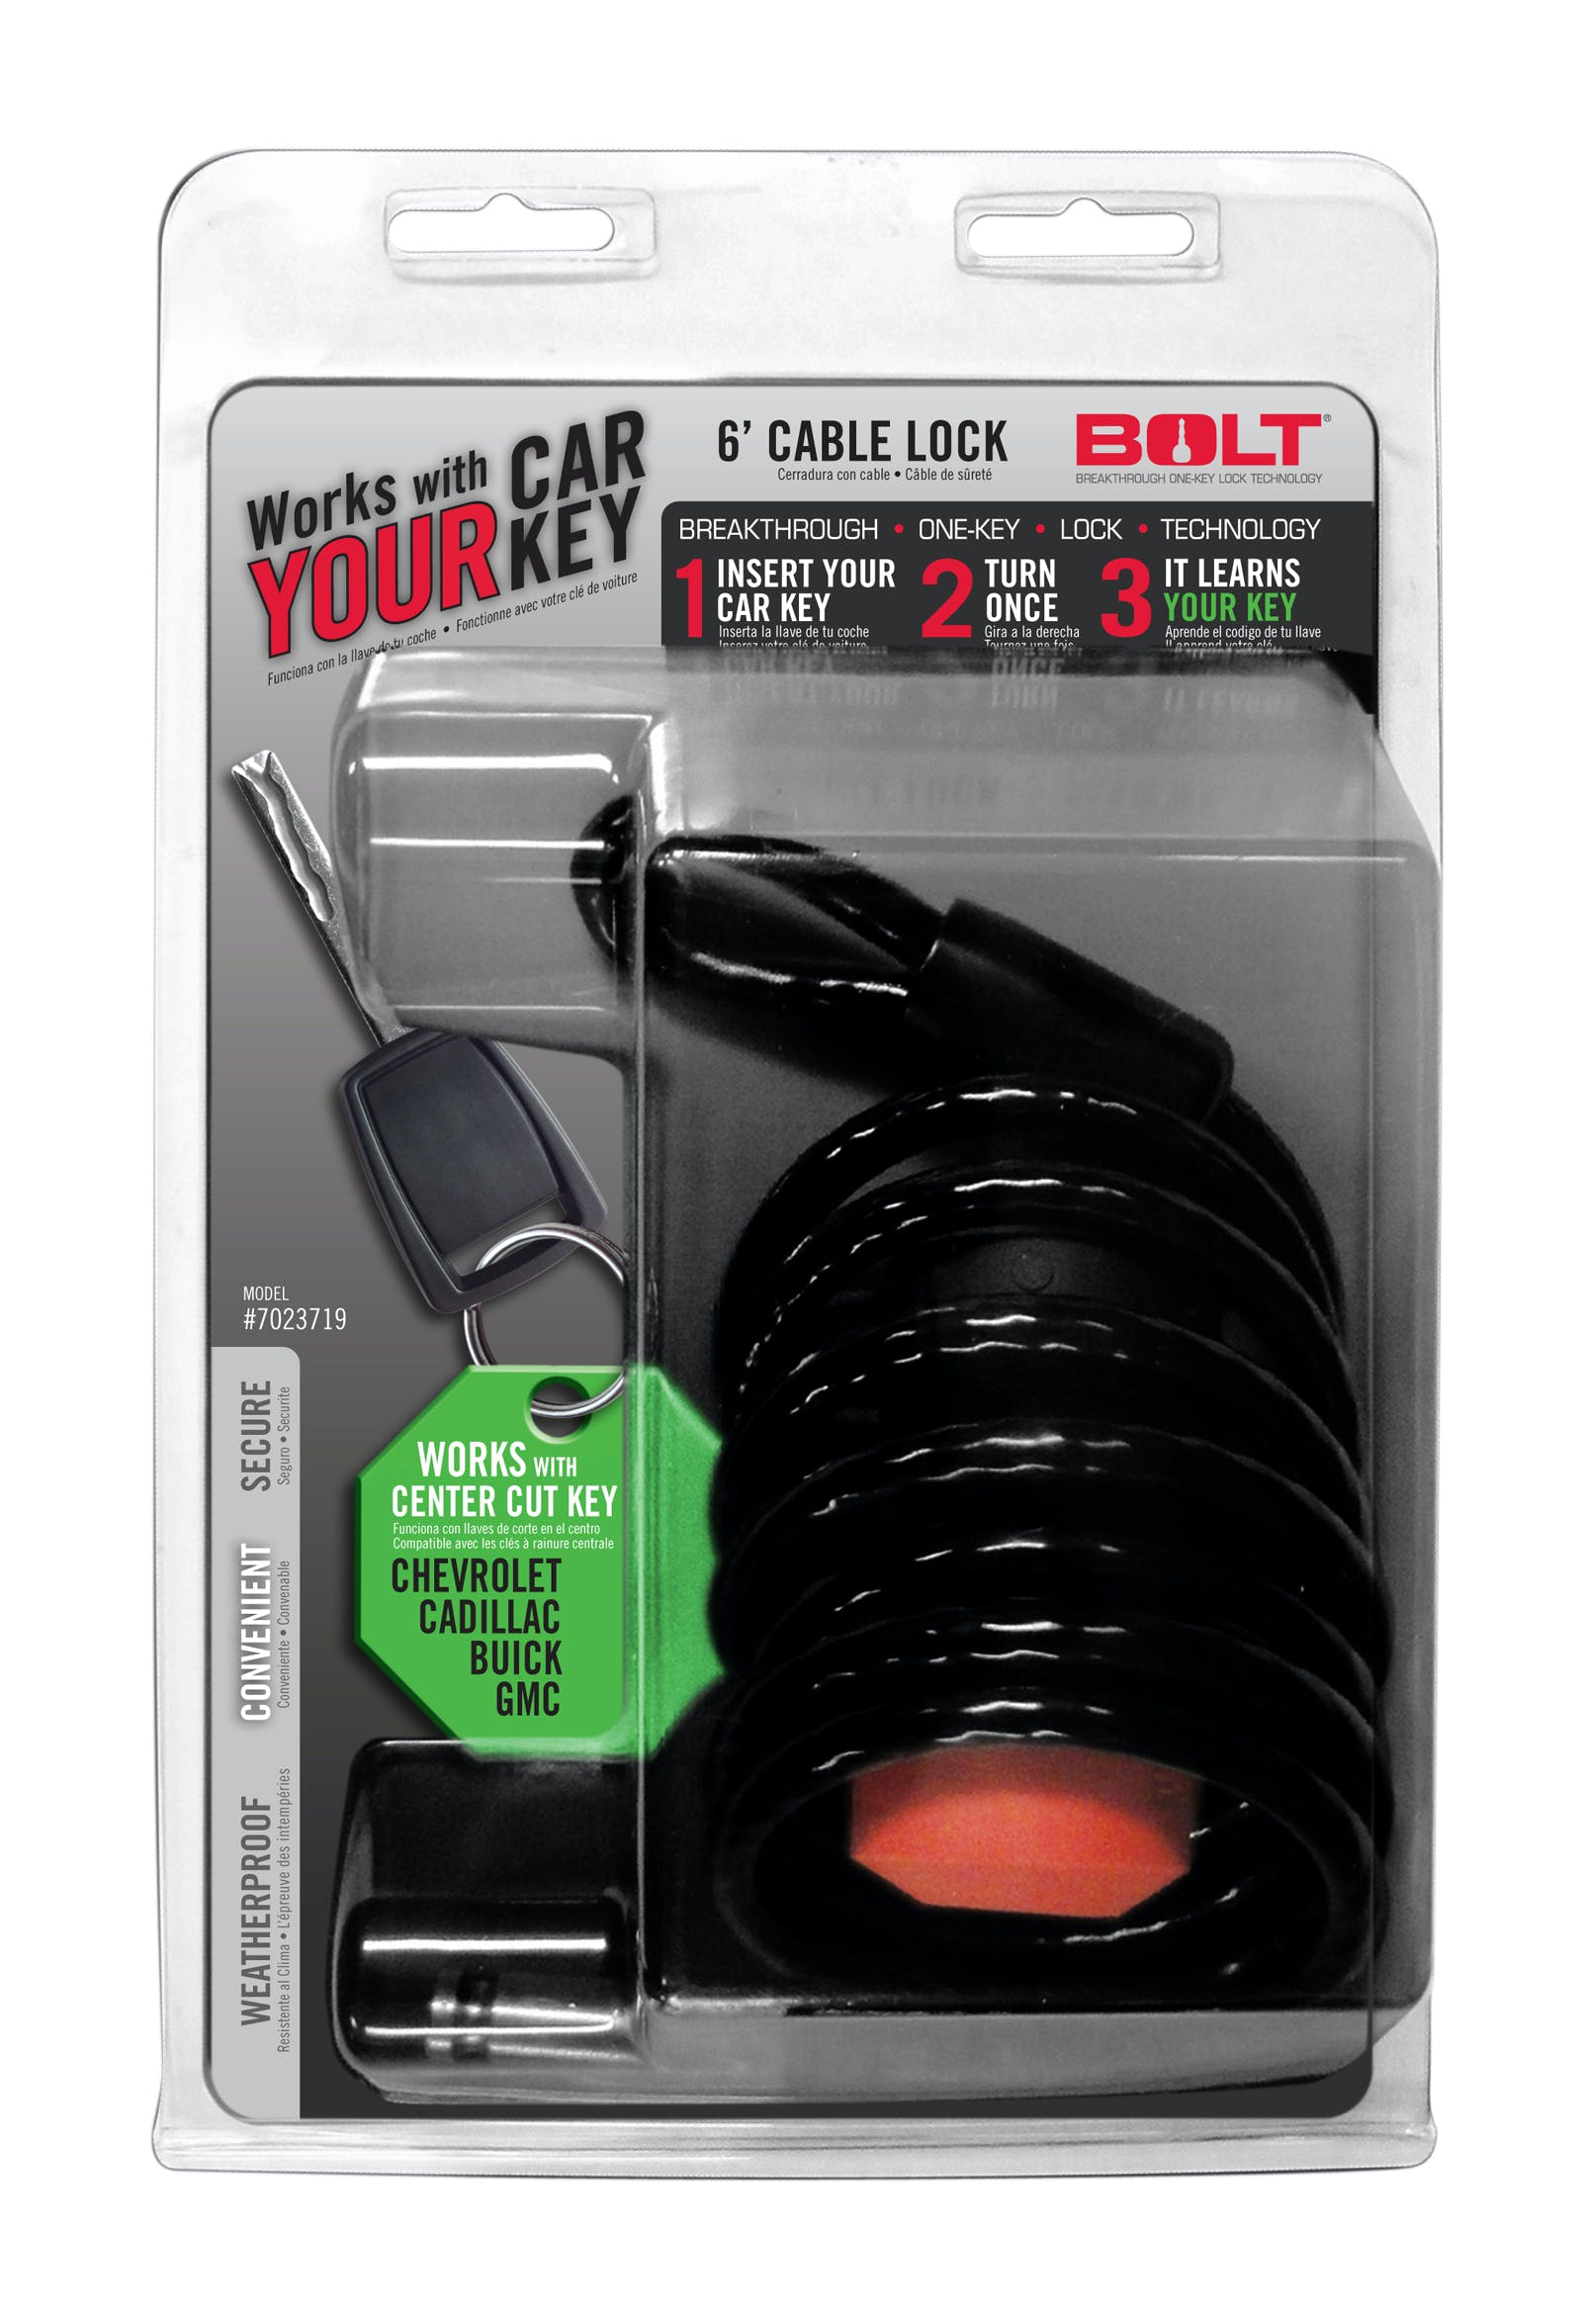 BOLT 7023719 Cable Lock